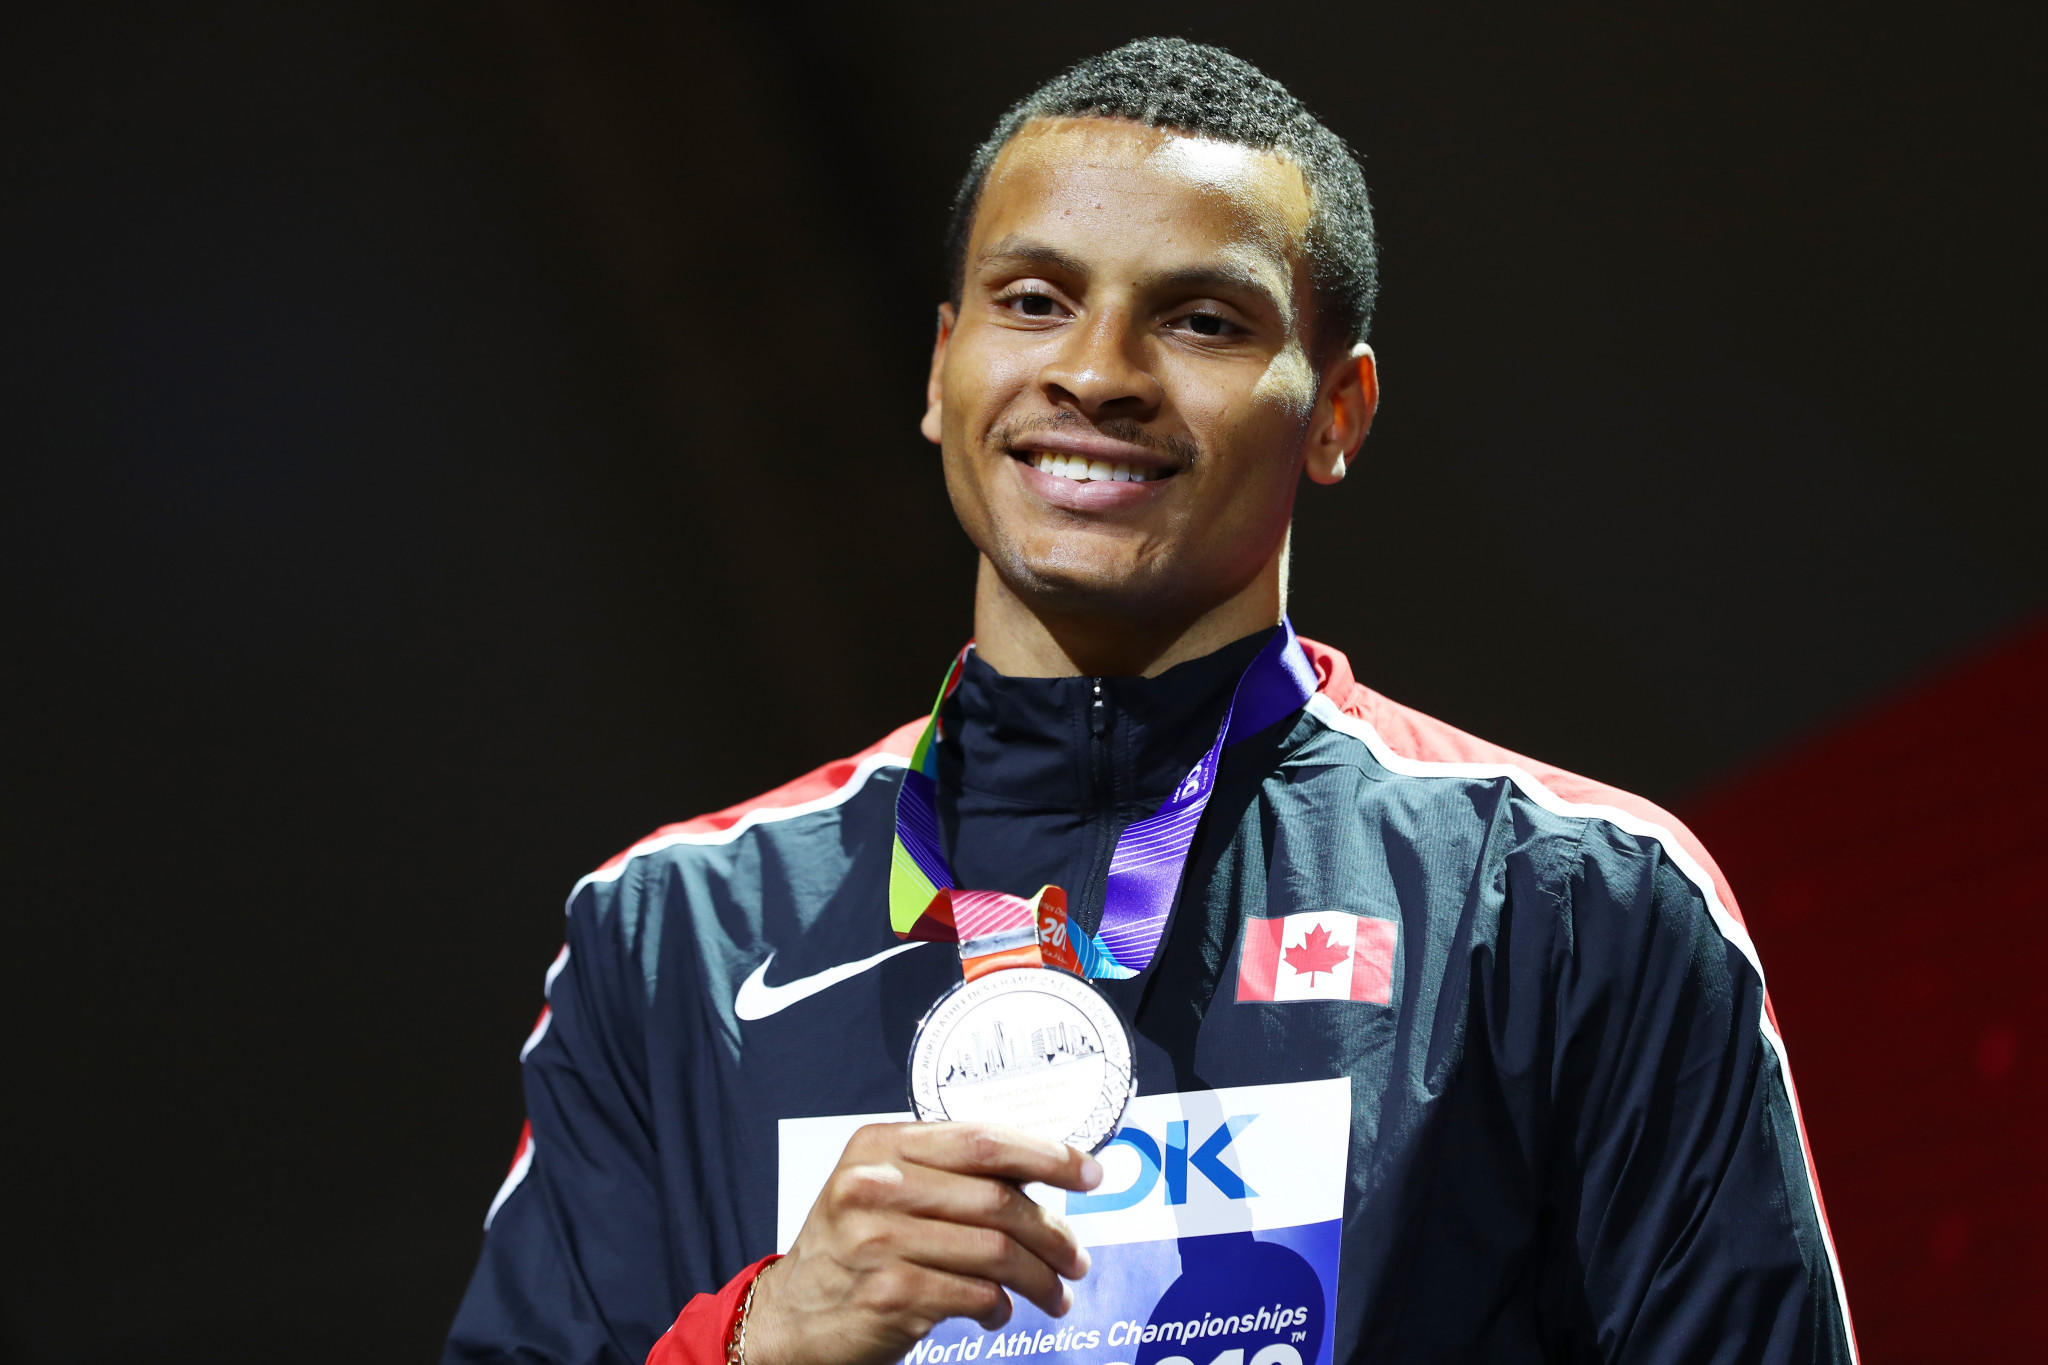 De Grasse eyes opportunity to upgrade to gold at Tokyo 2020